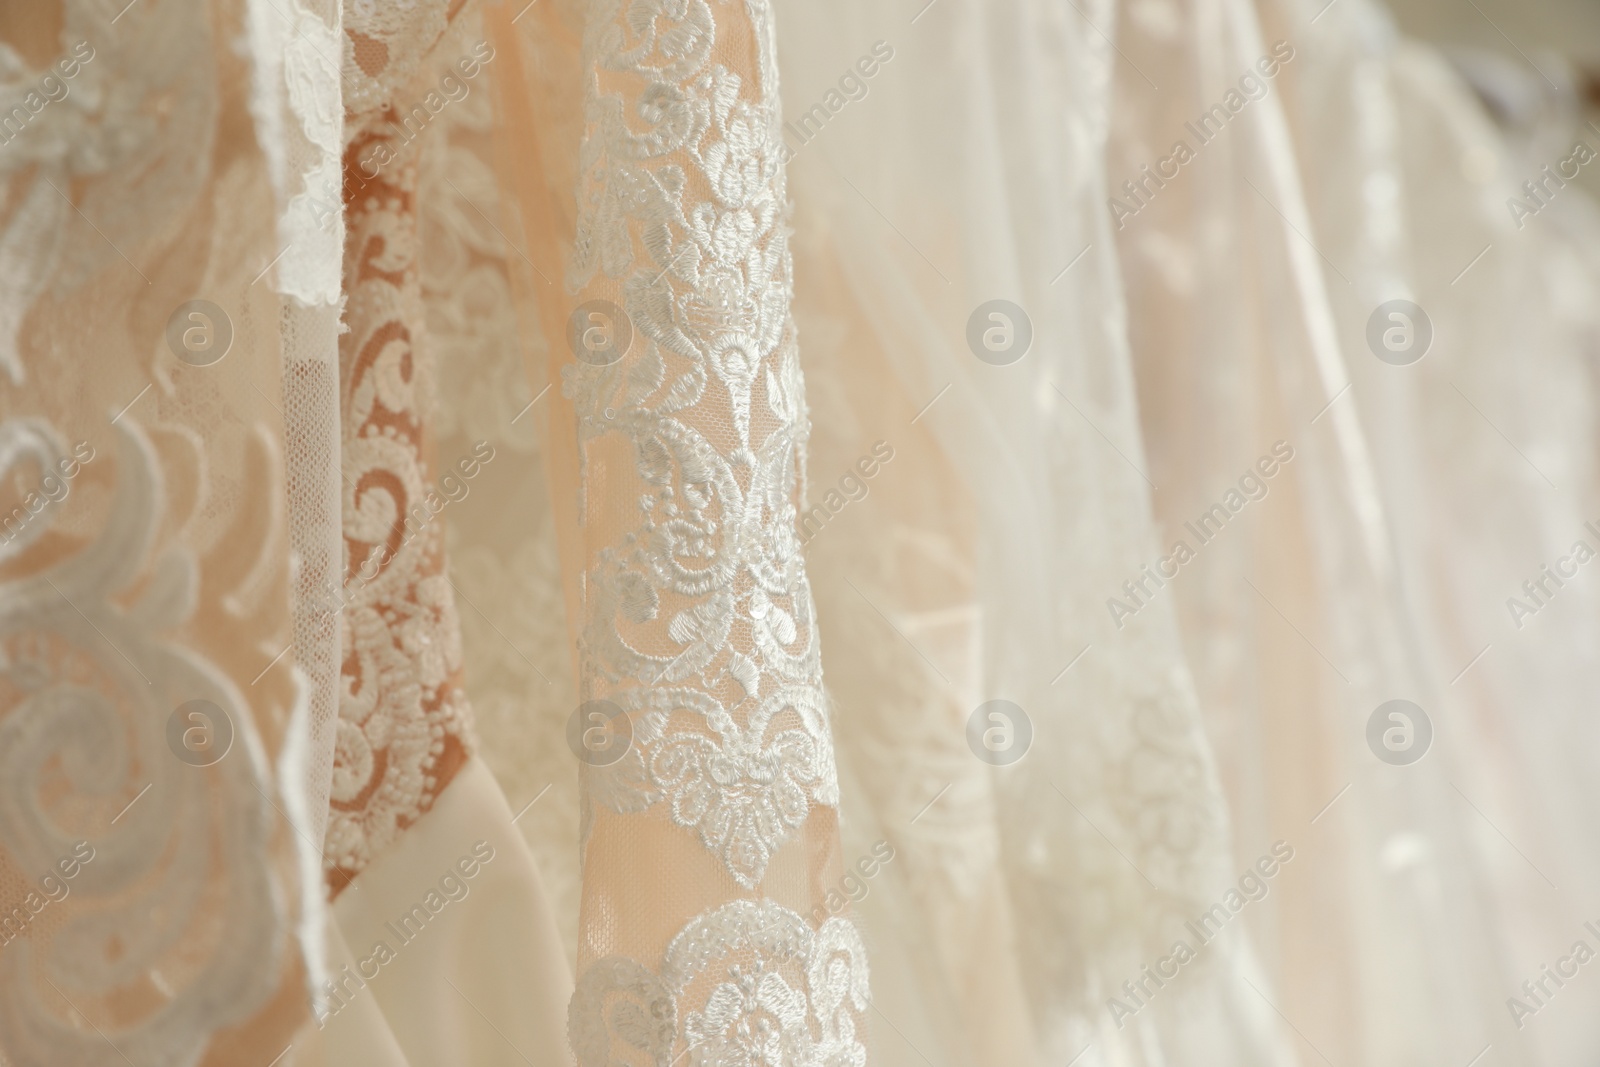 Photo of Different wedding dresses on hangers, closeup view